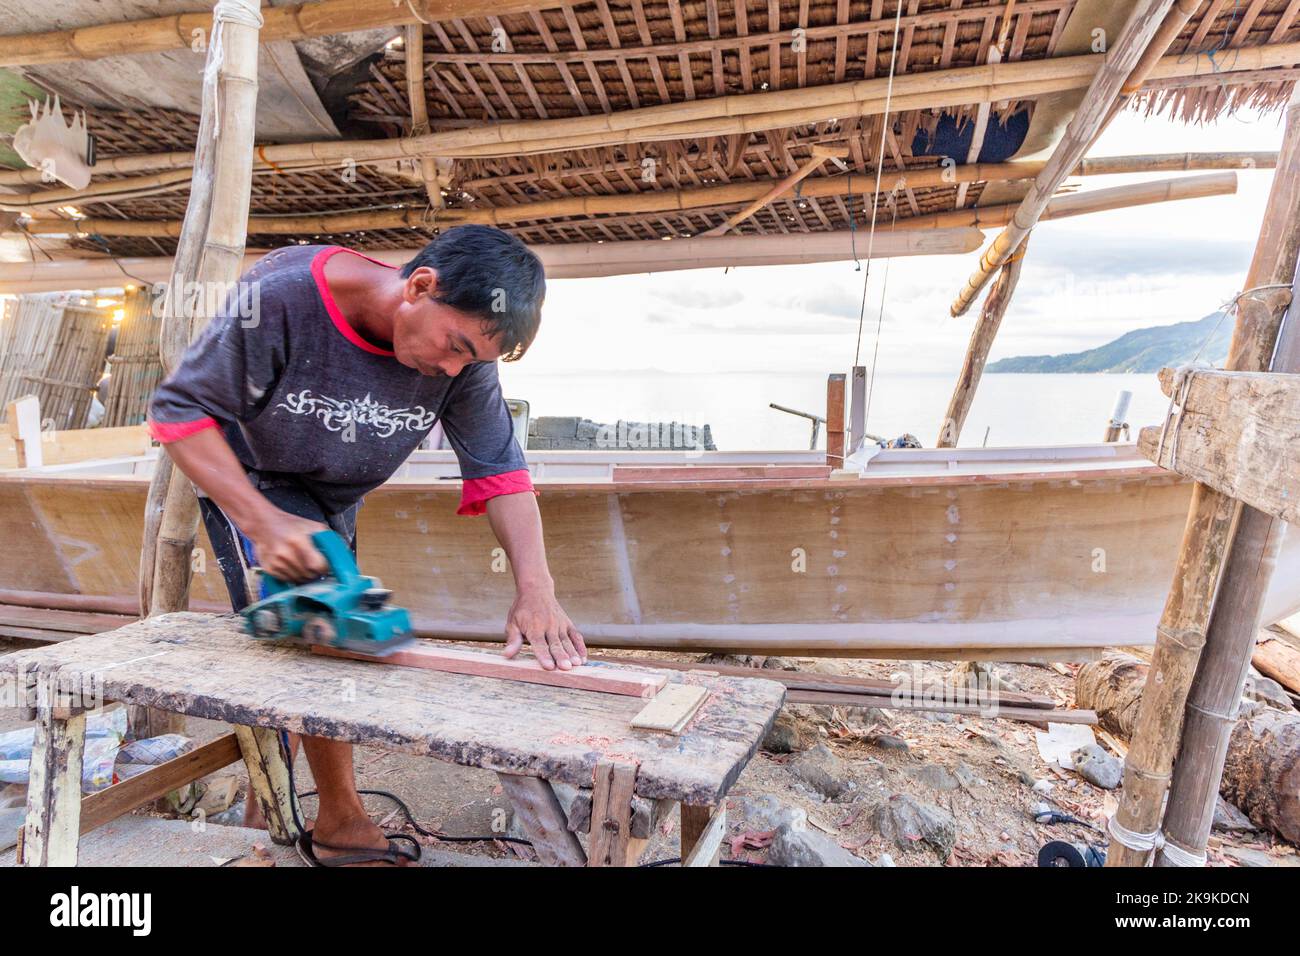 A boat builder using a power planer in Batangas, Philippines Stock Photo